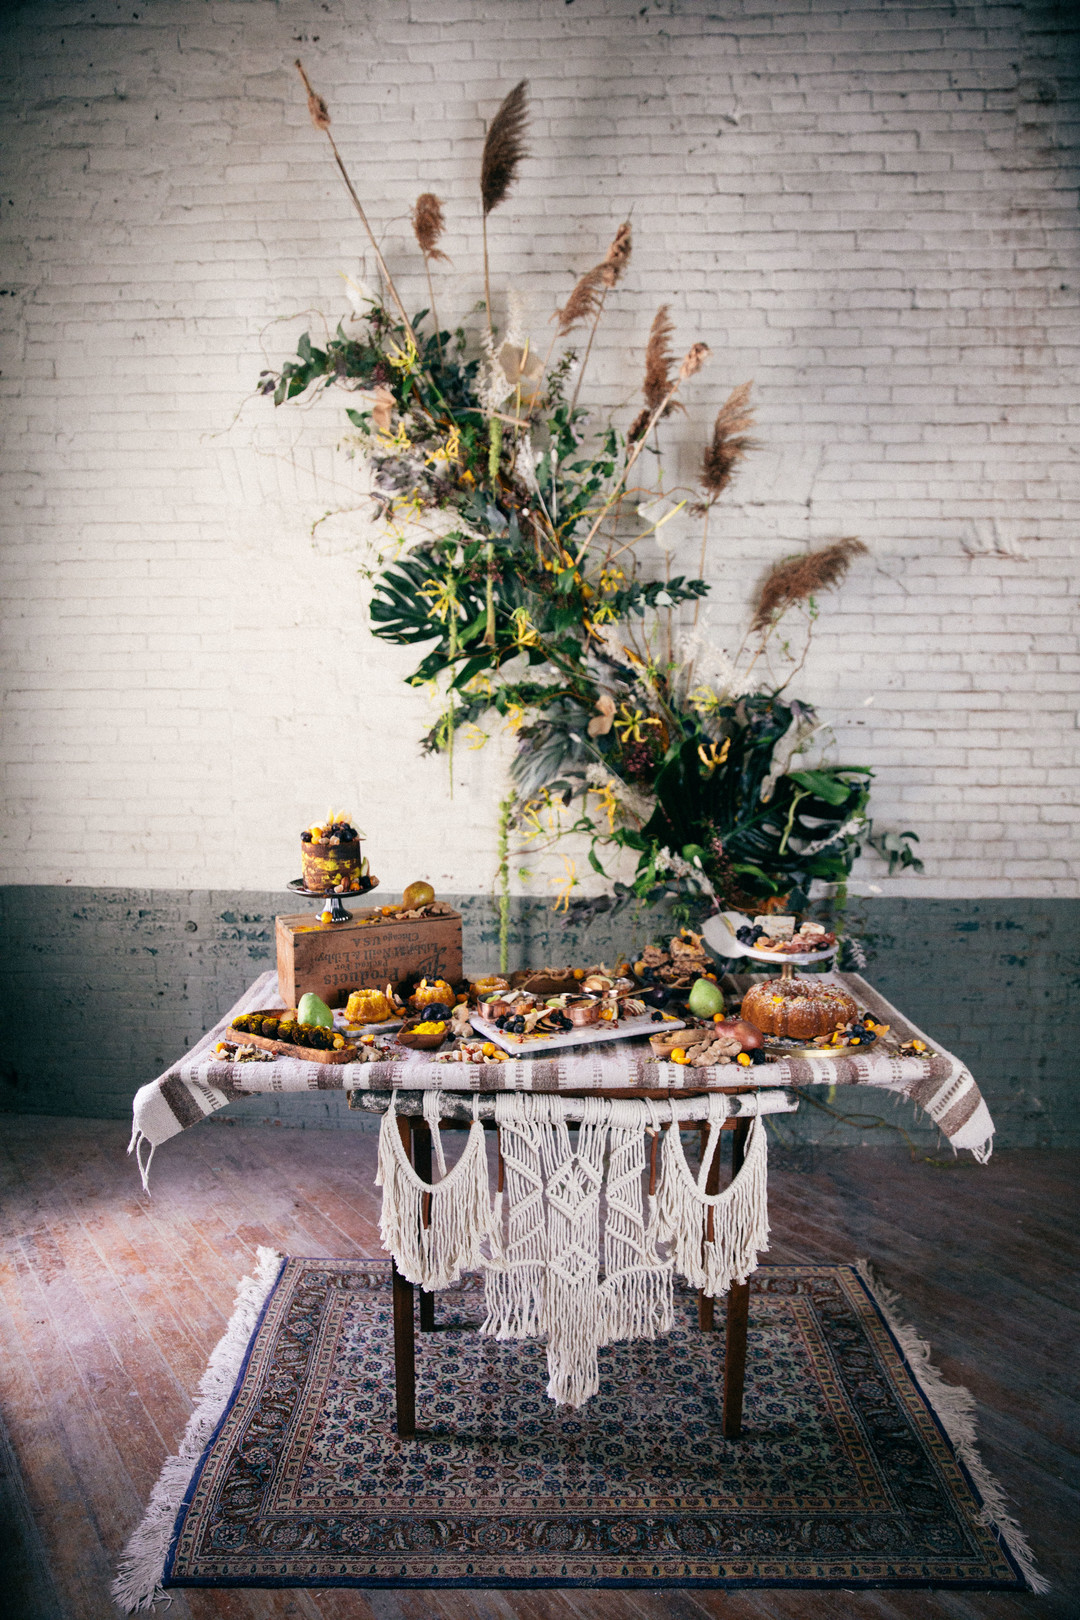 The table was decorated with macrame and there is a gorgeous lush greenery and dried flowers backdrop